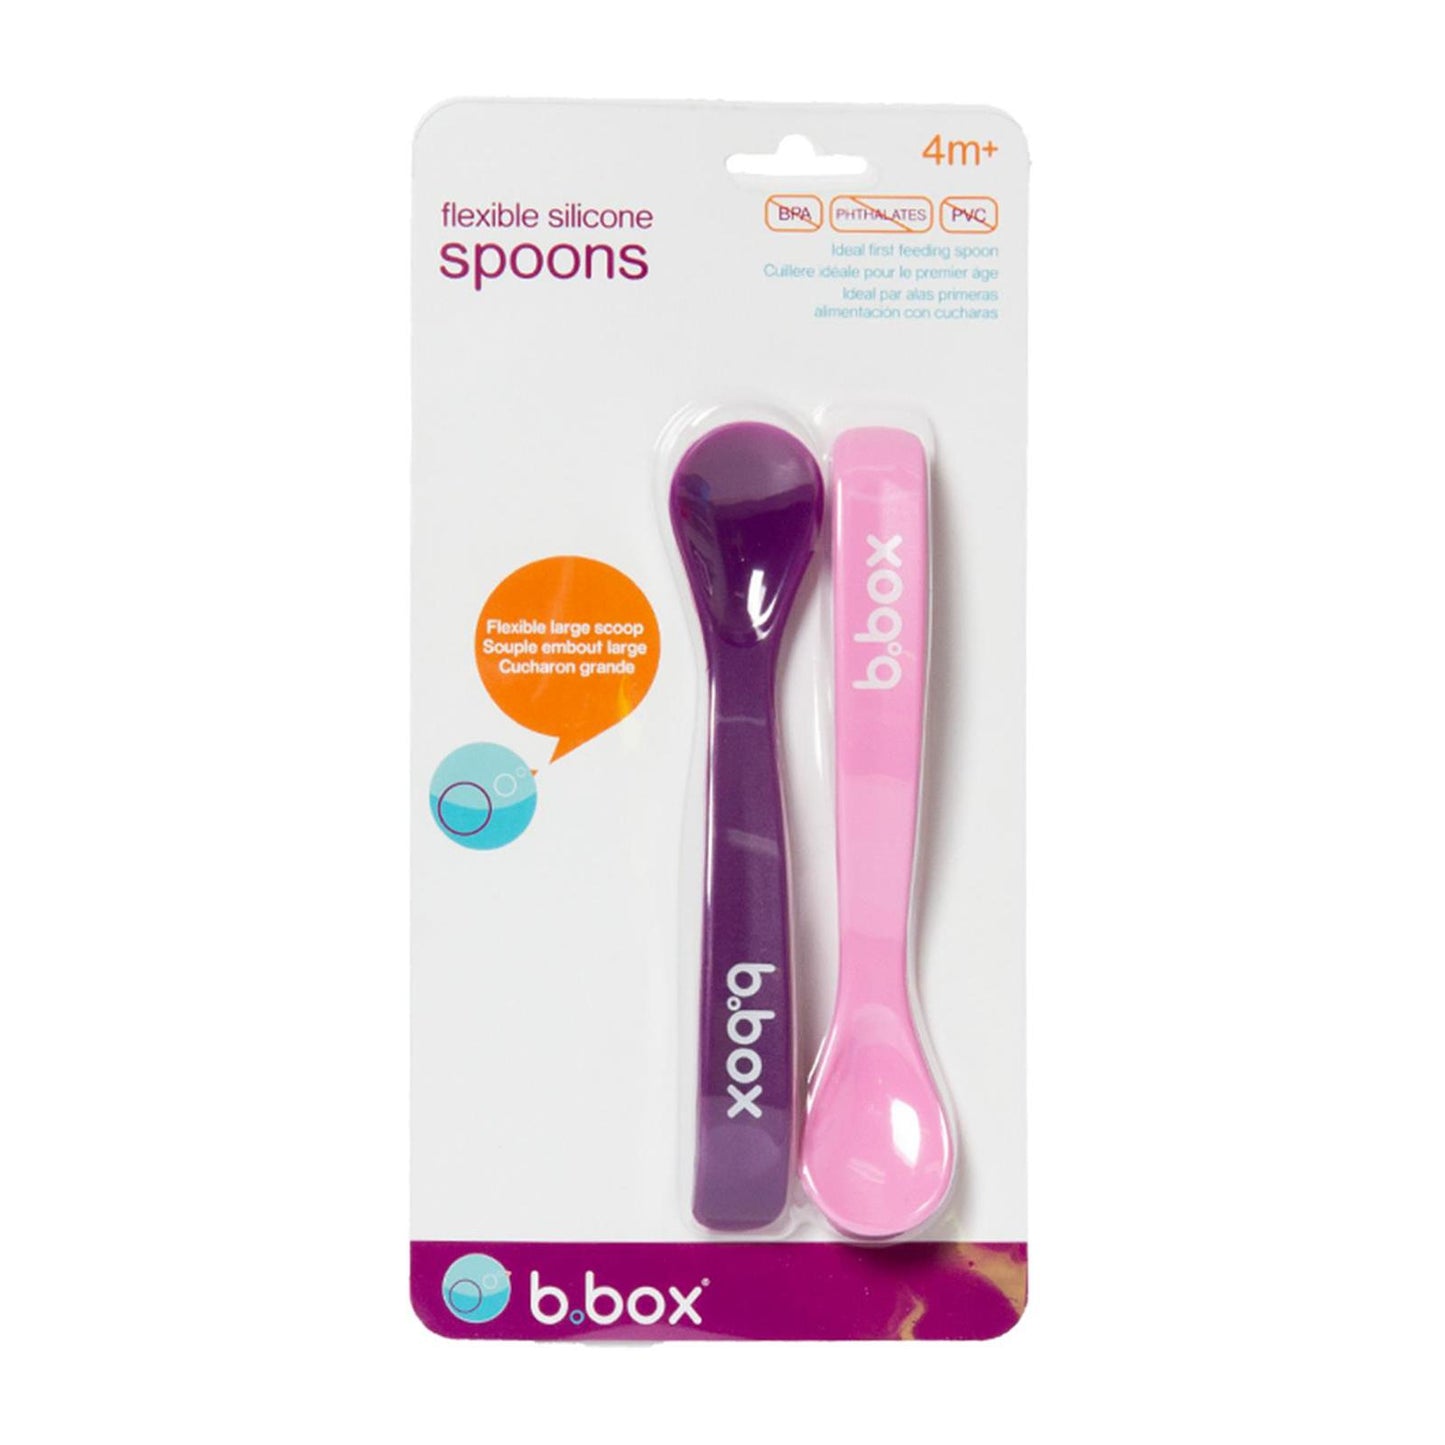 b.box Flexible Silicone Spoon Pack - Pink/Purple